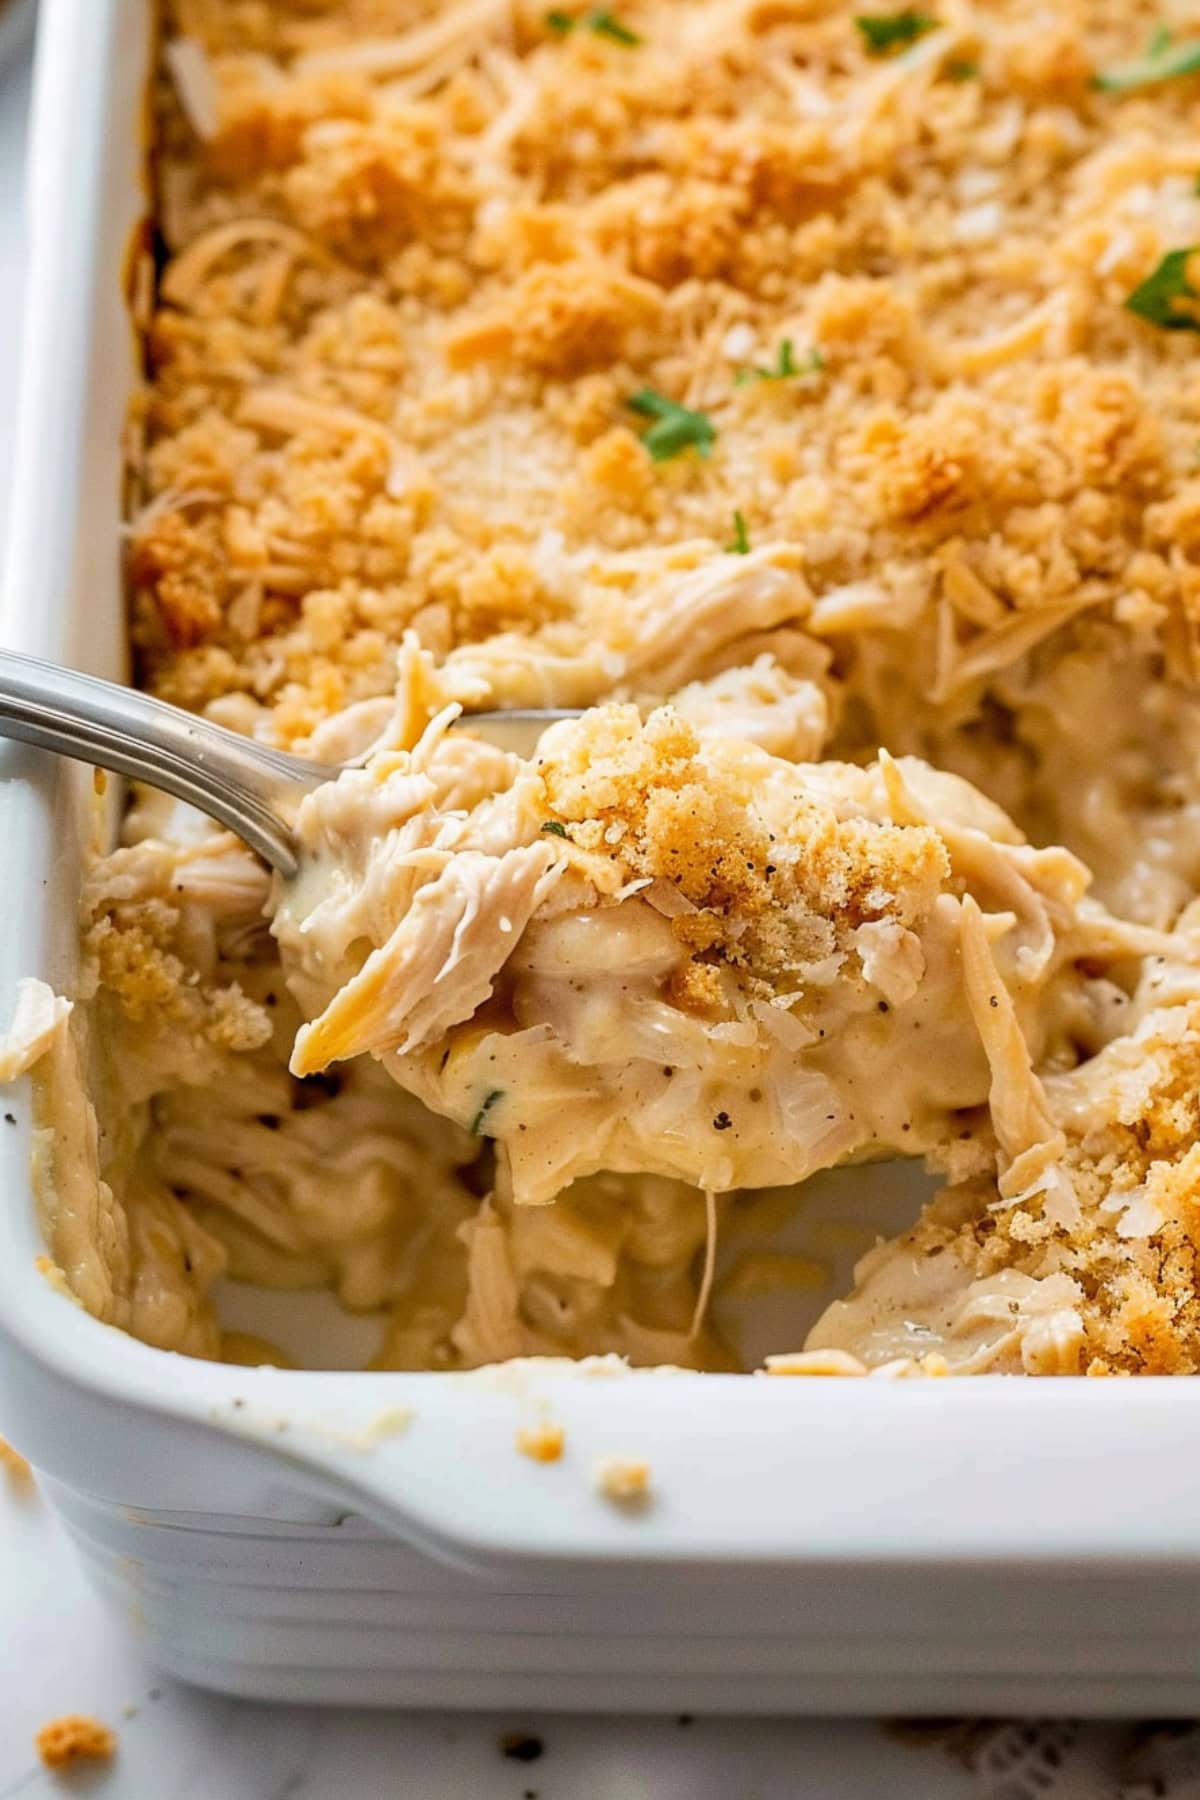 Spoonful of creamy chicken casserole in a baking dish.